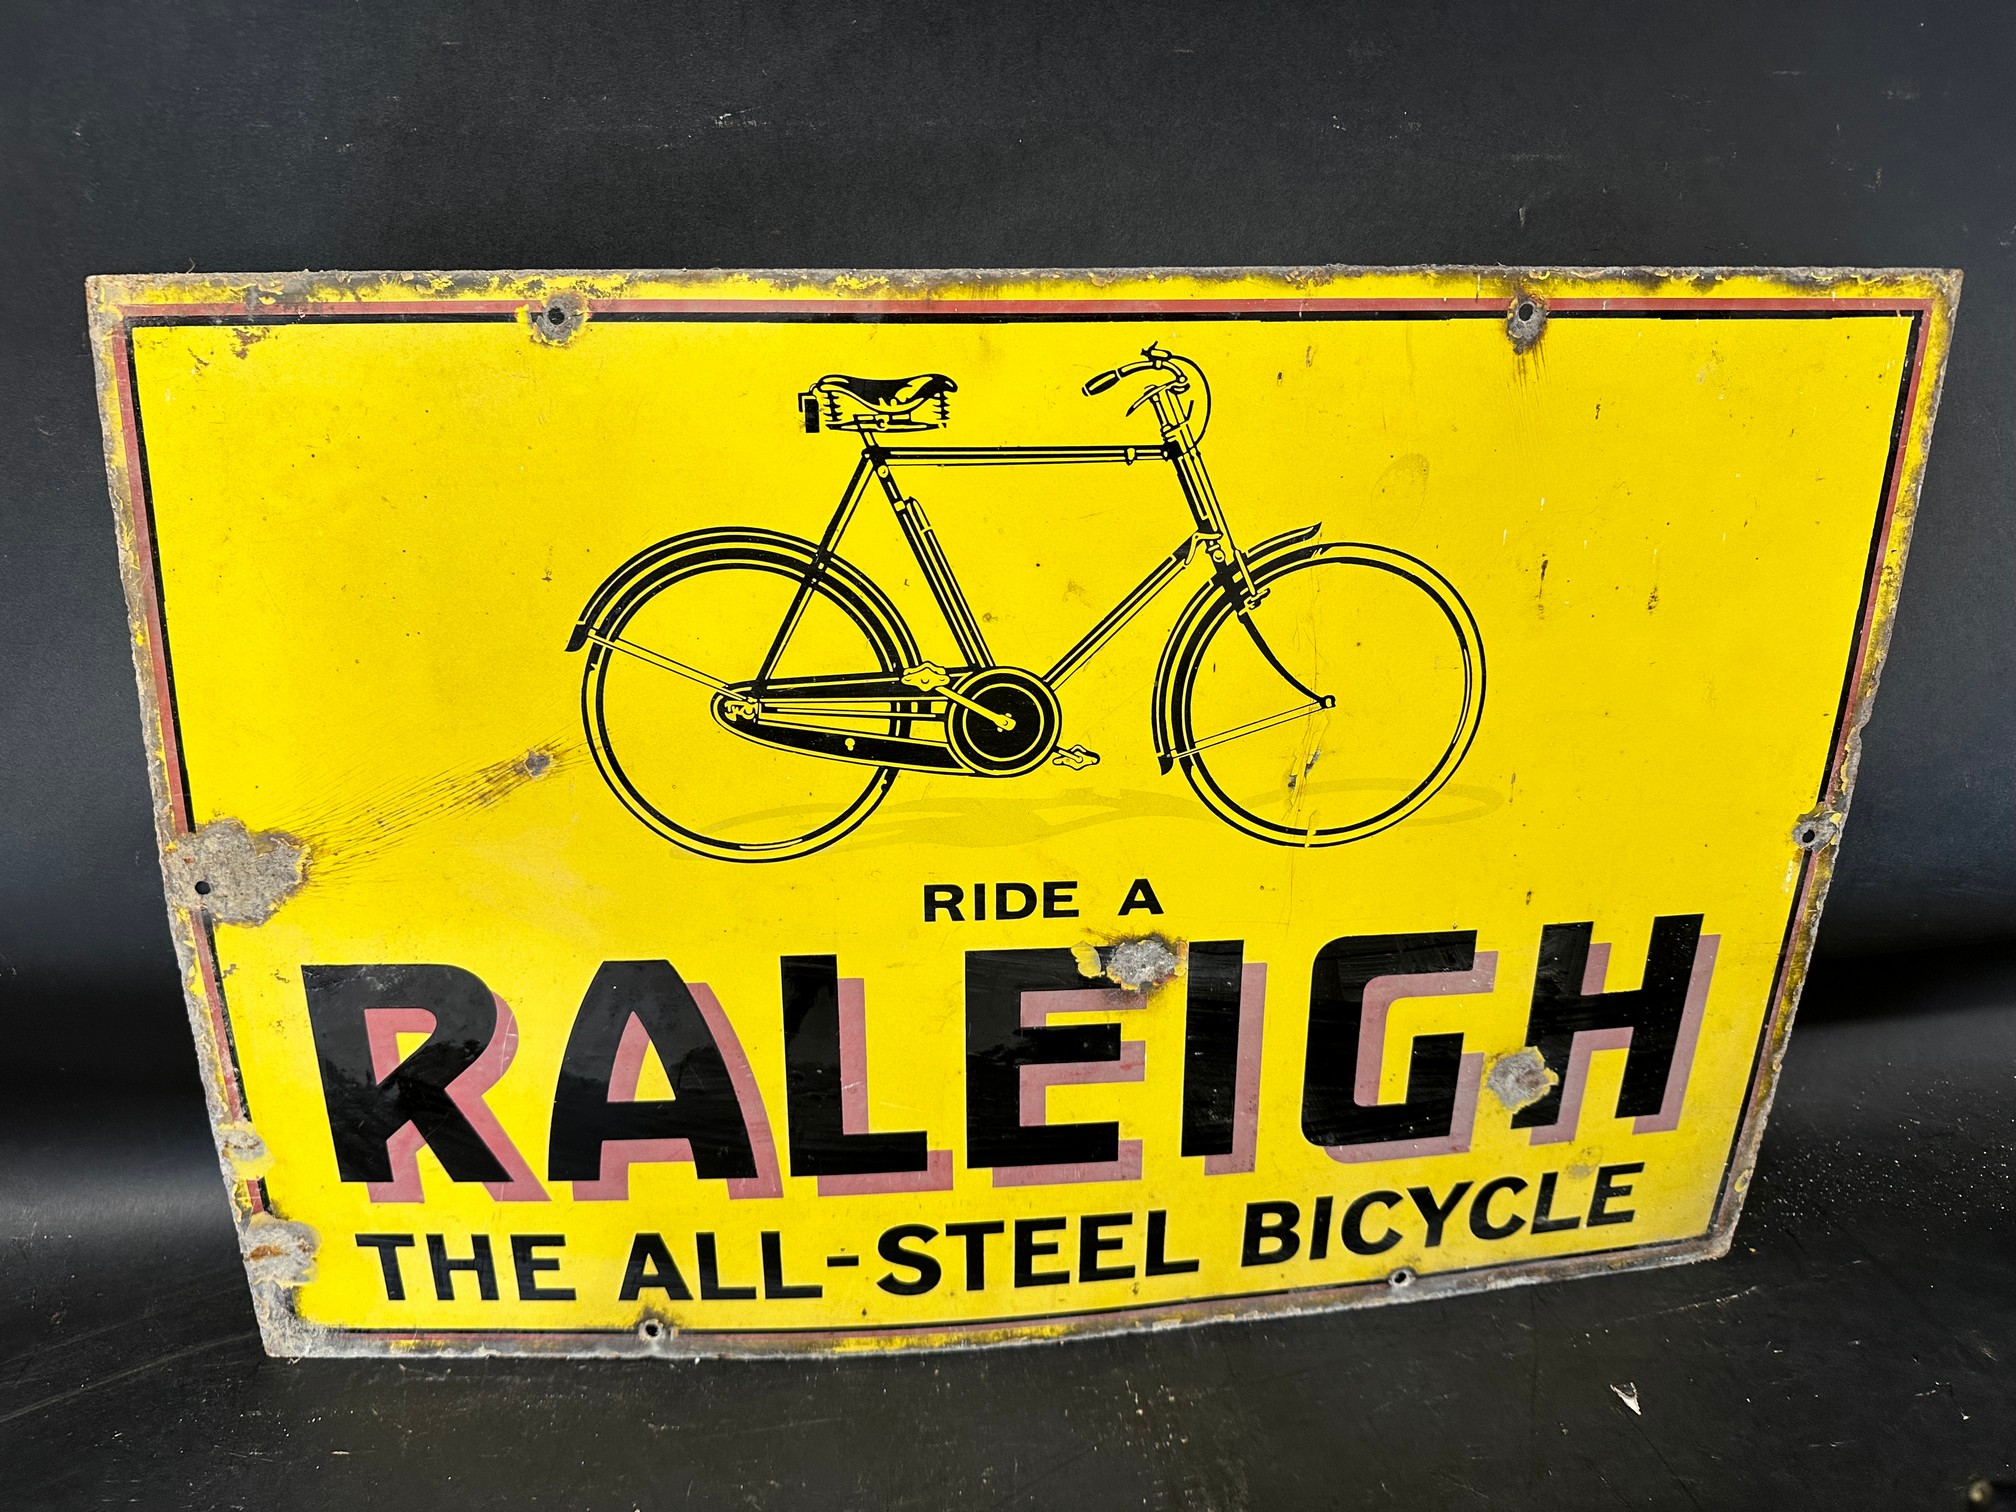 A Raleigh enamel advertising sign with illustration of bicycle, 'Ride a Raleigh the All-Steel